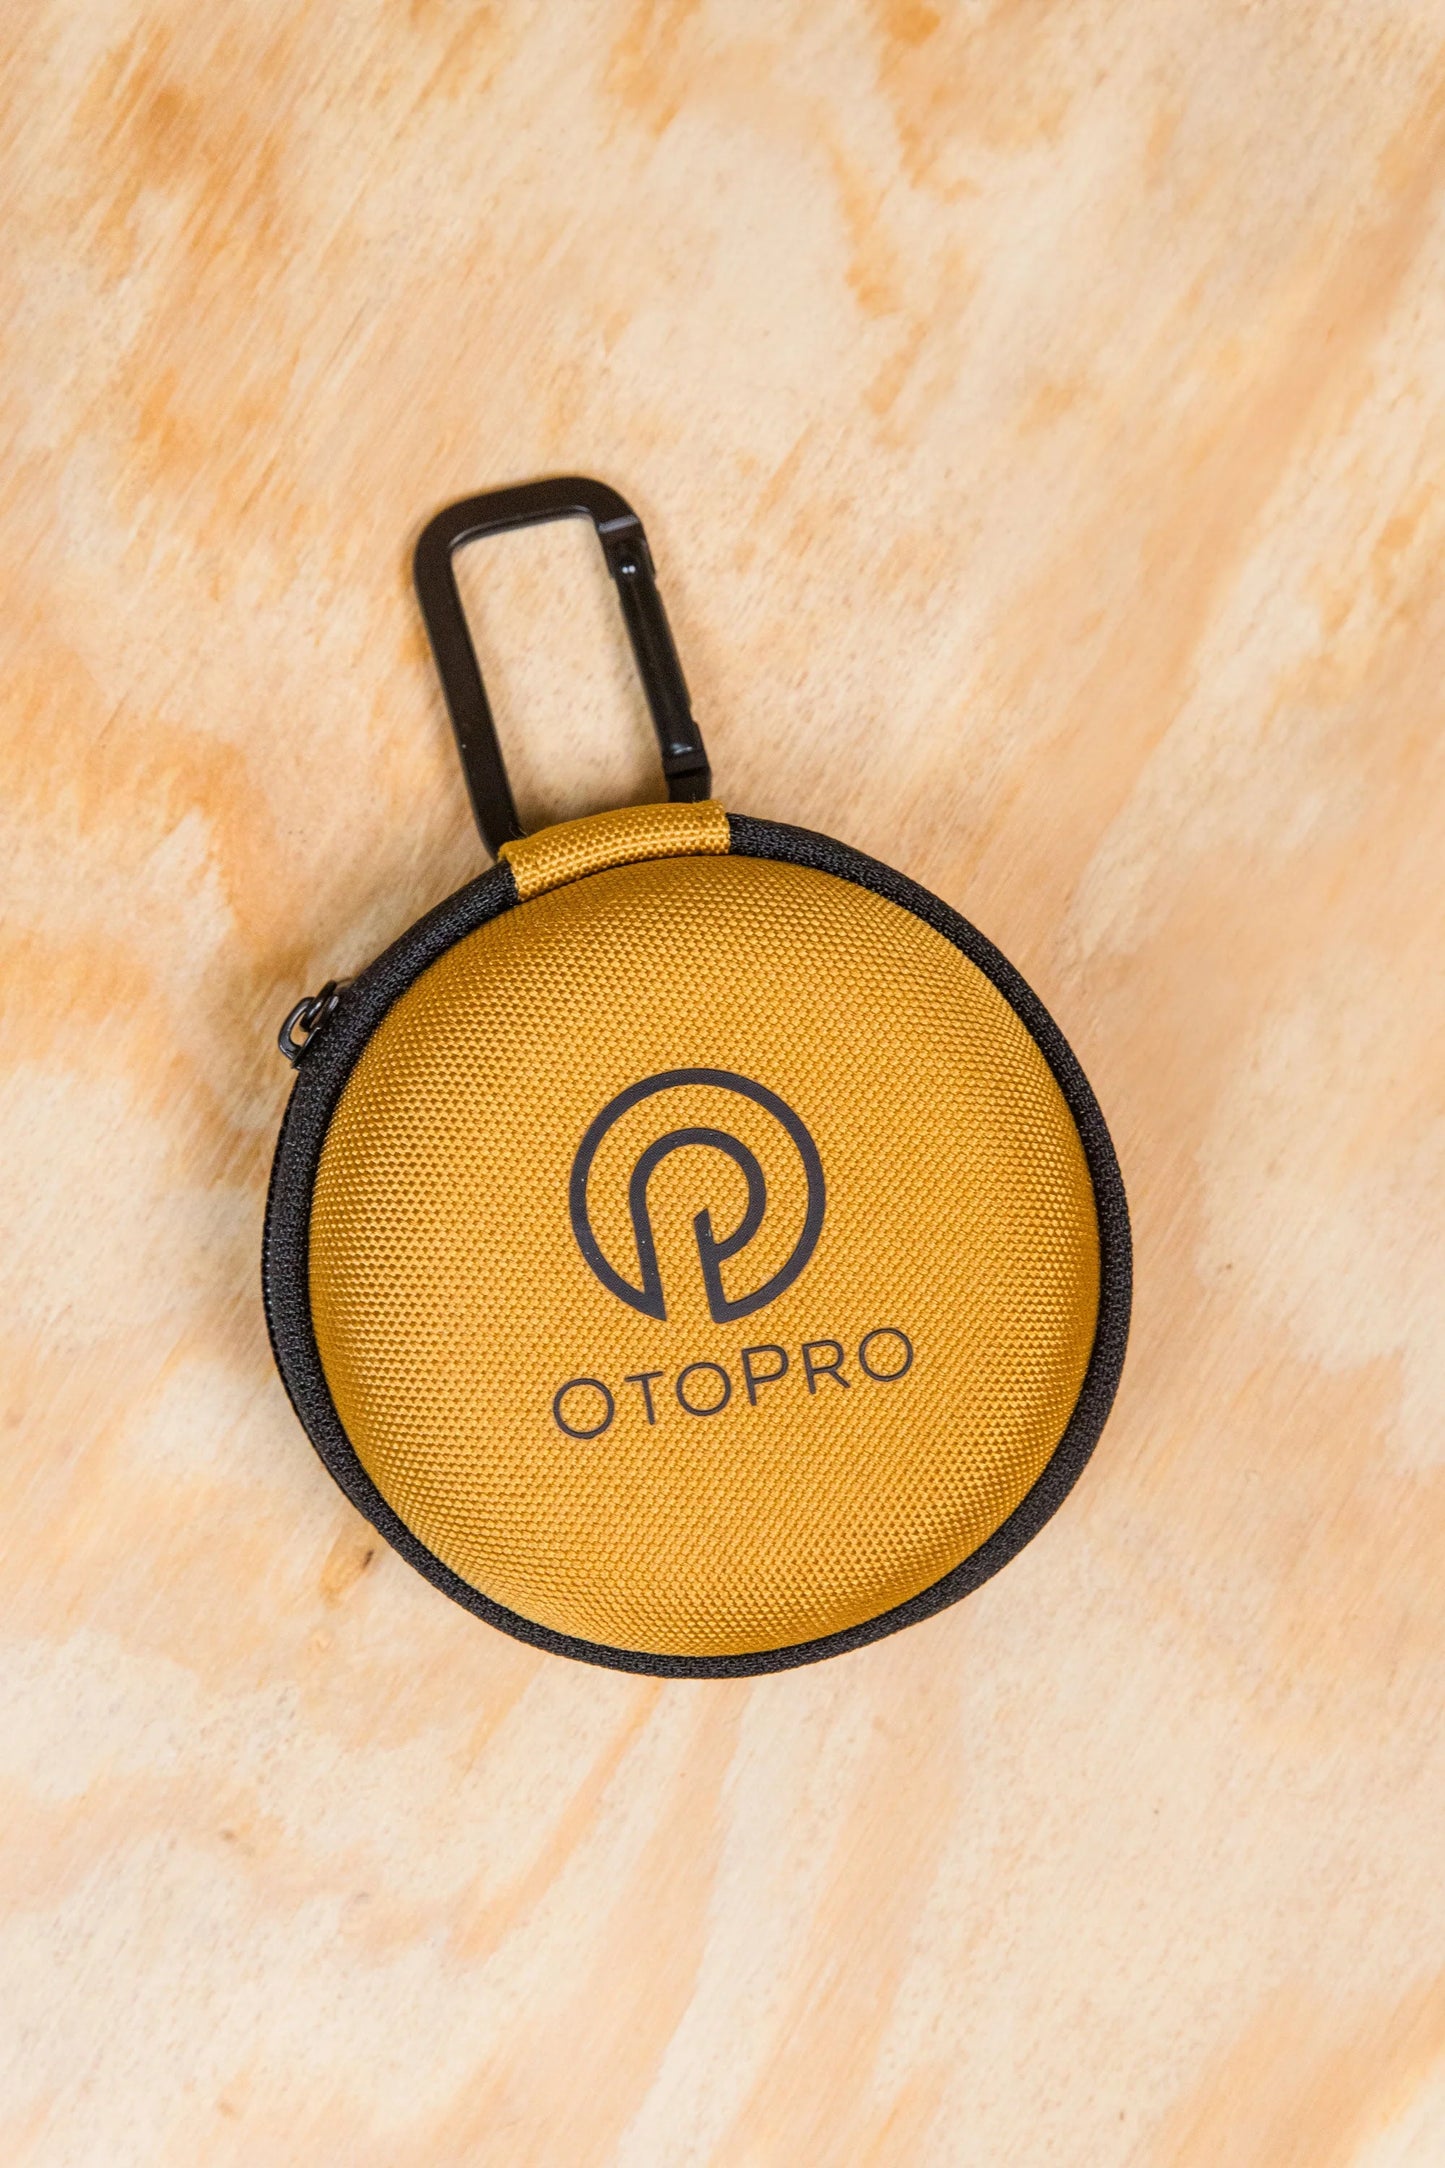 Complimentary OtoPro Hard Case